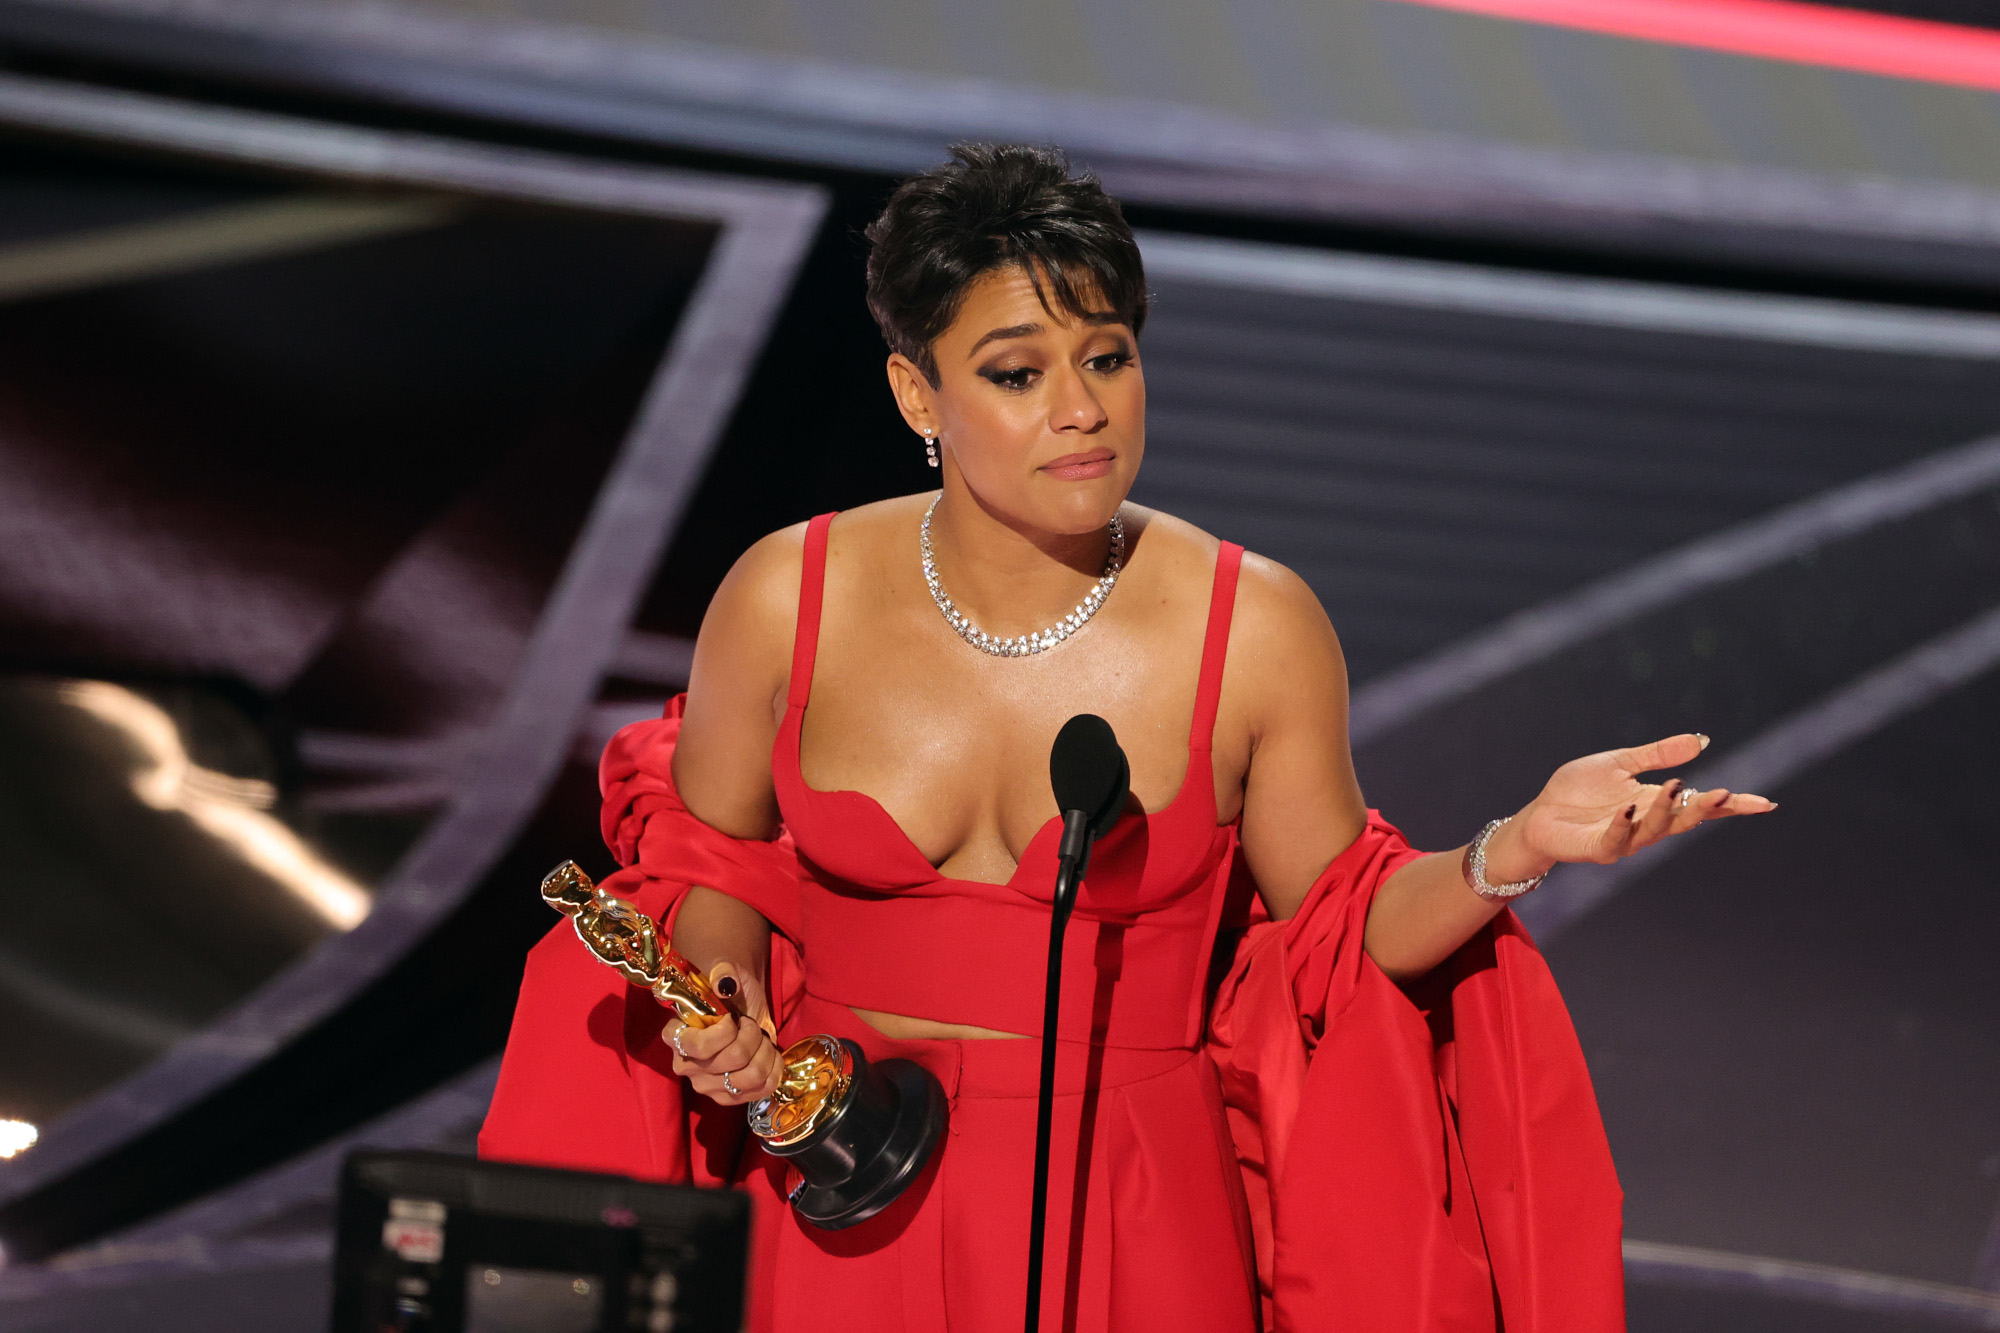 'West Side Story' star Ariana DeBose wins Best Supporting Actress at the 2022 Oscars. She's wearing a red dress and holding the trophy.